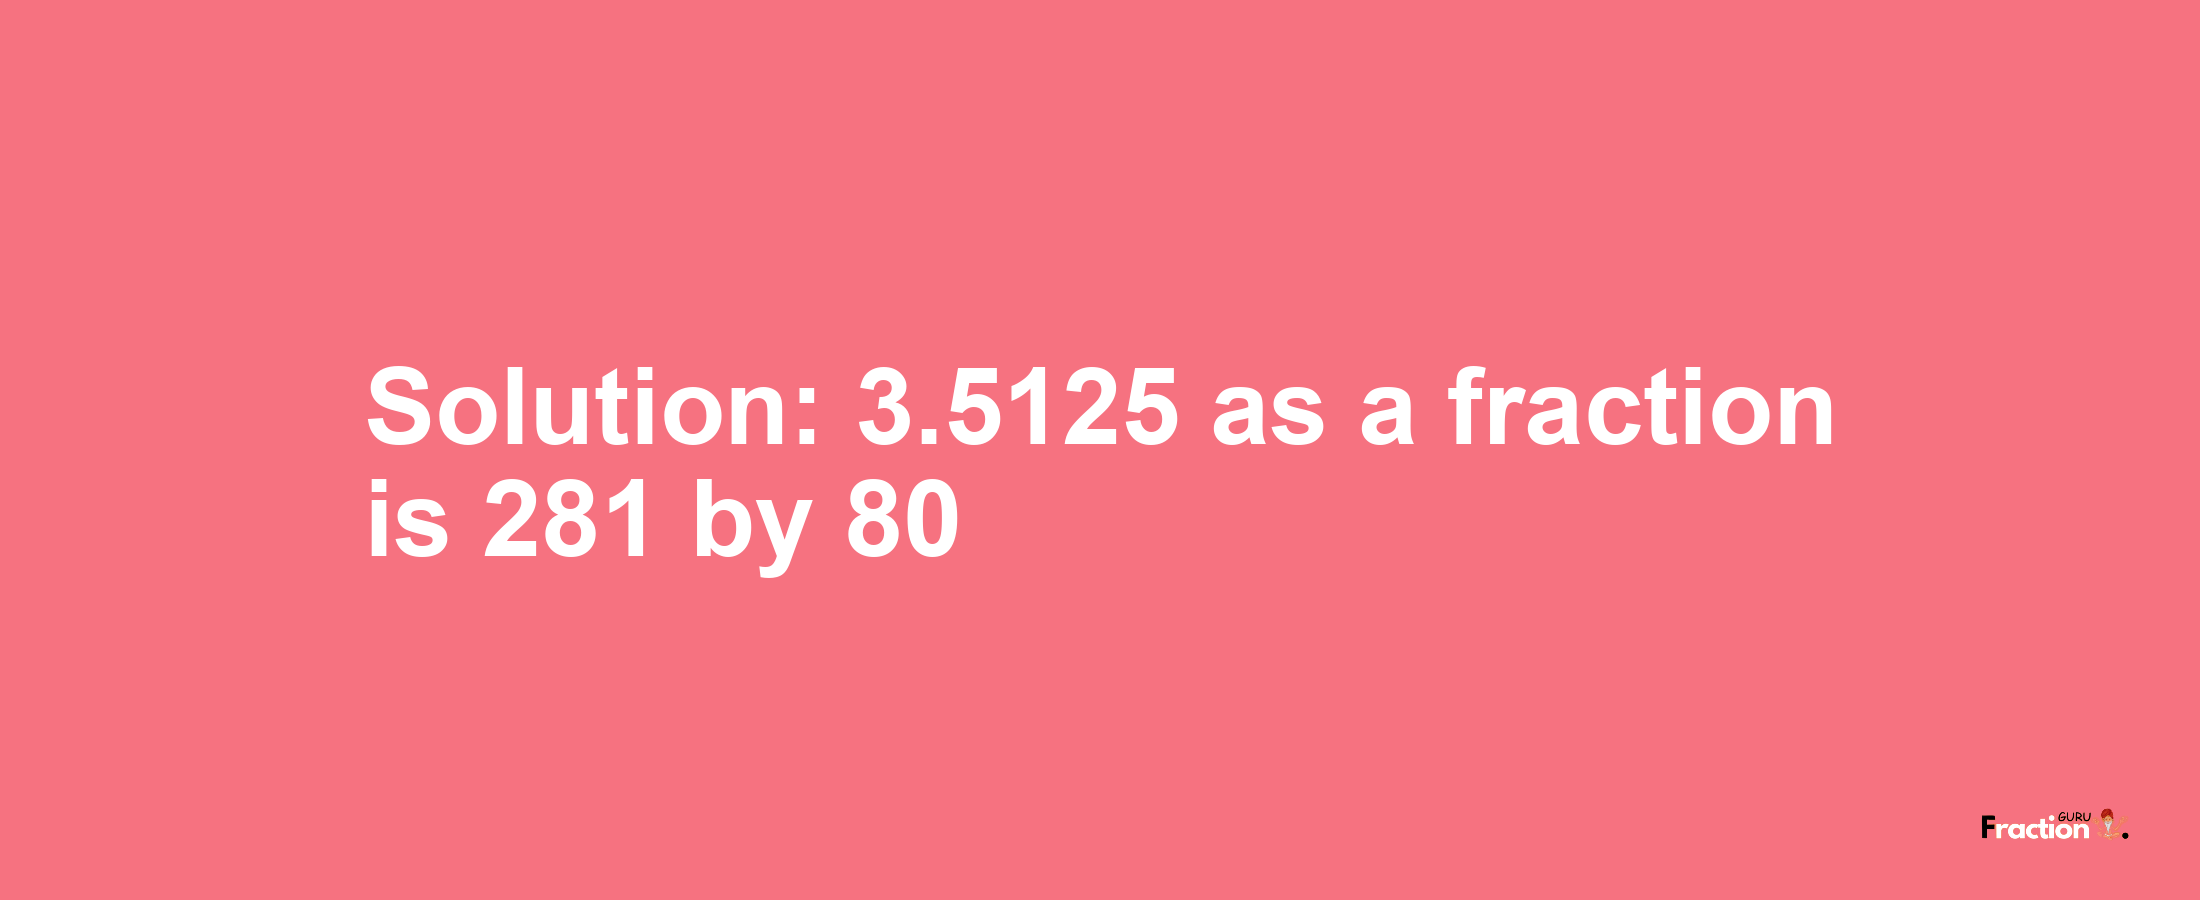 Solution:3.5125 as a fraction is 281/80